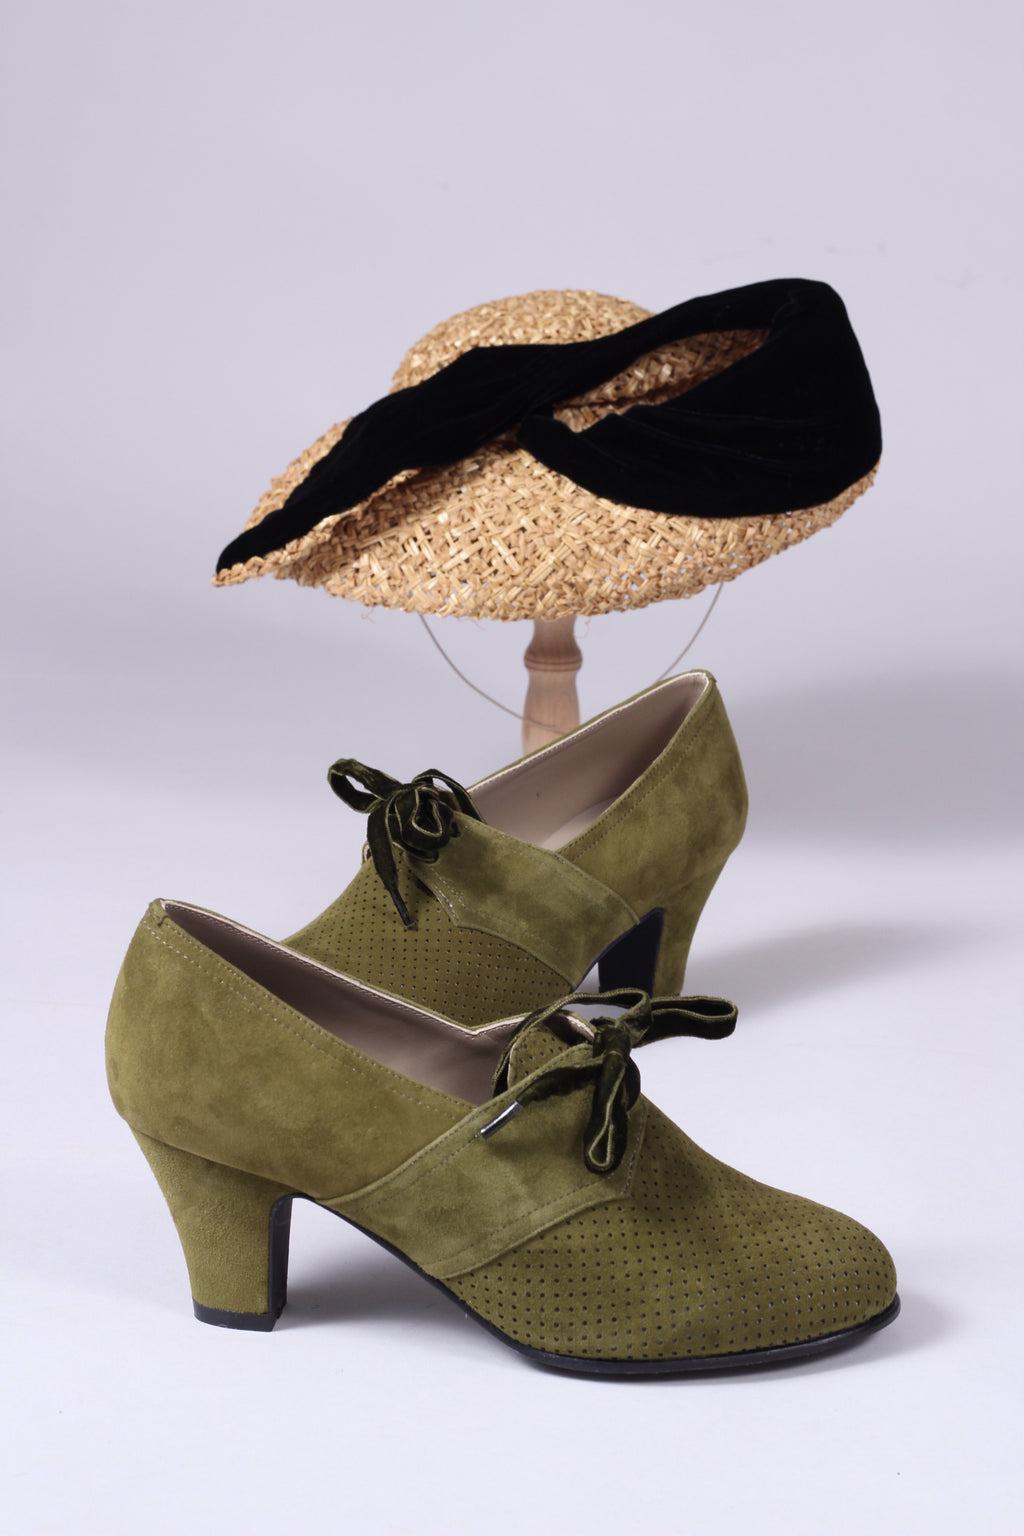 40s vintage style pumps in suede with lace - Black - Esther – memery